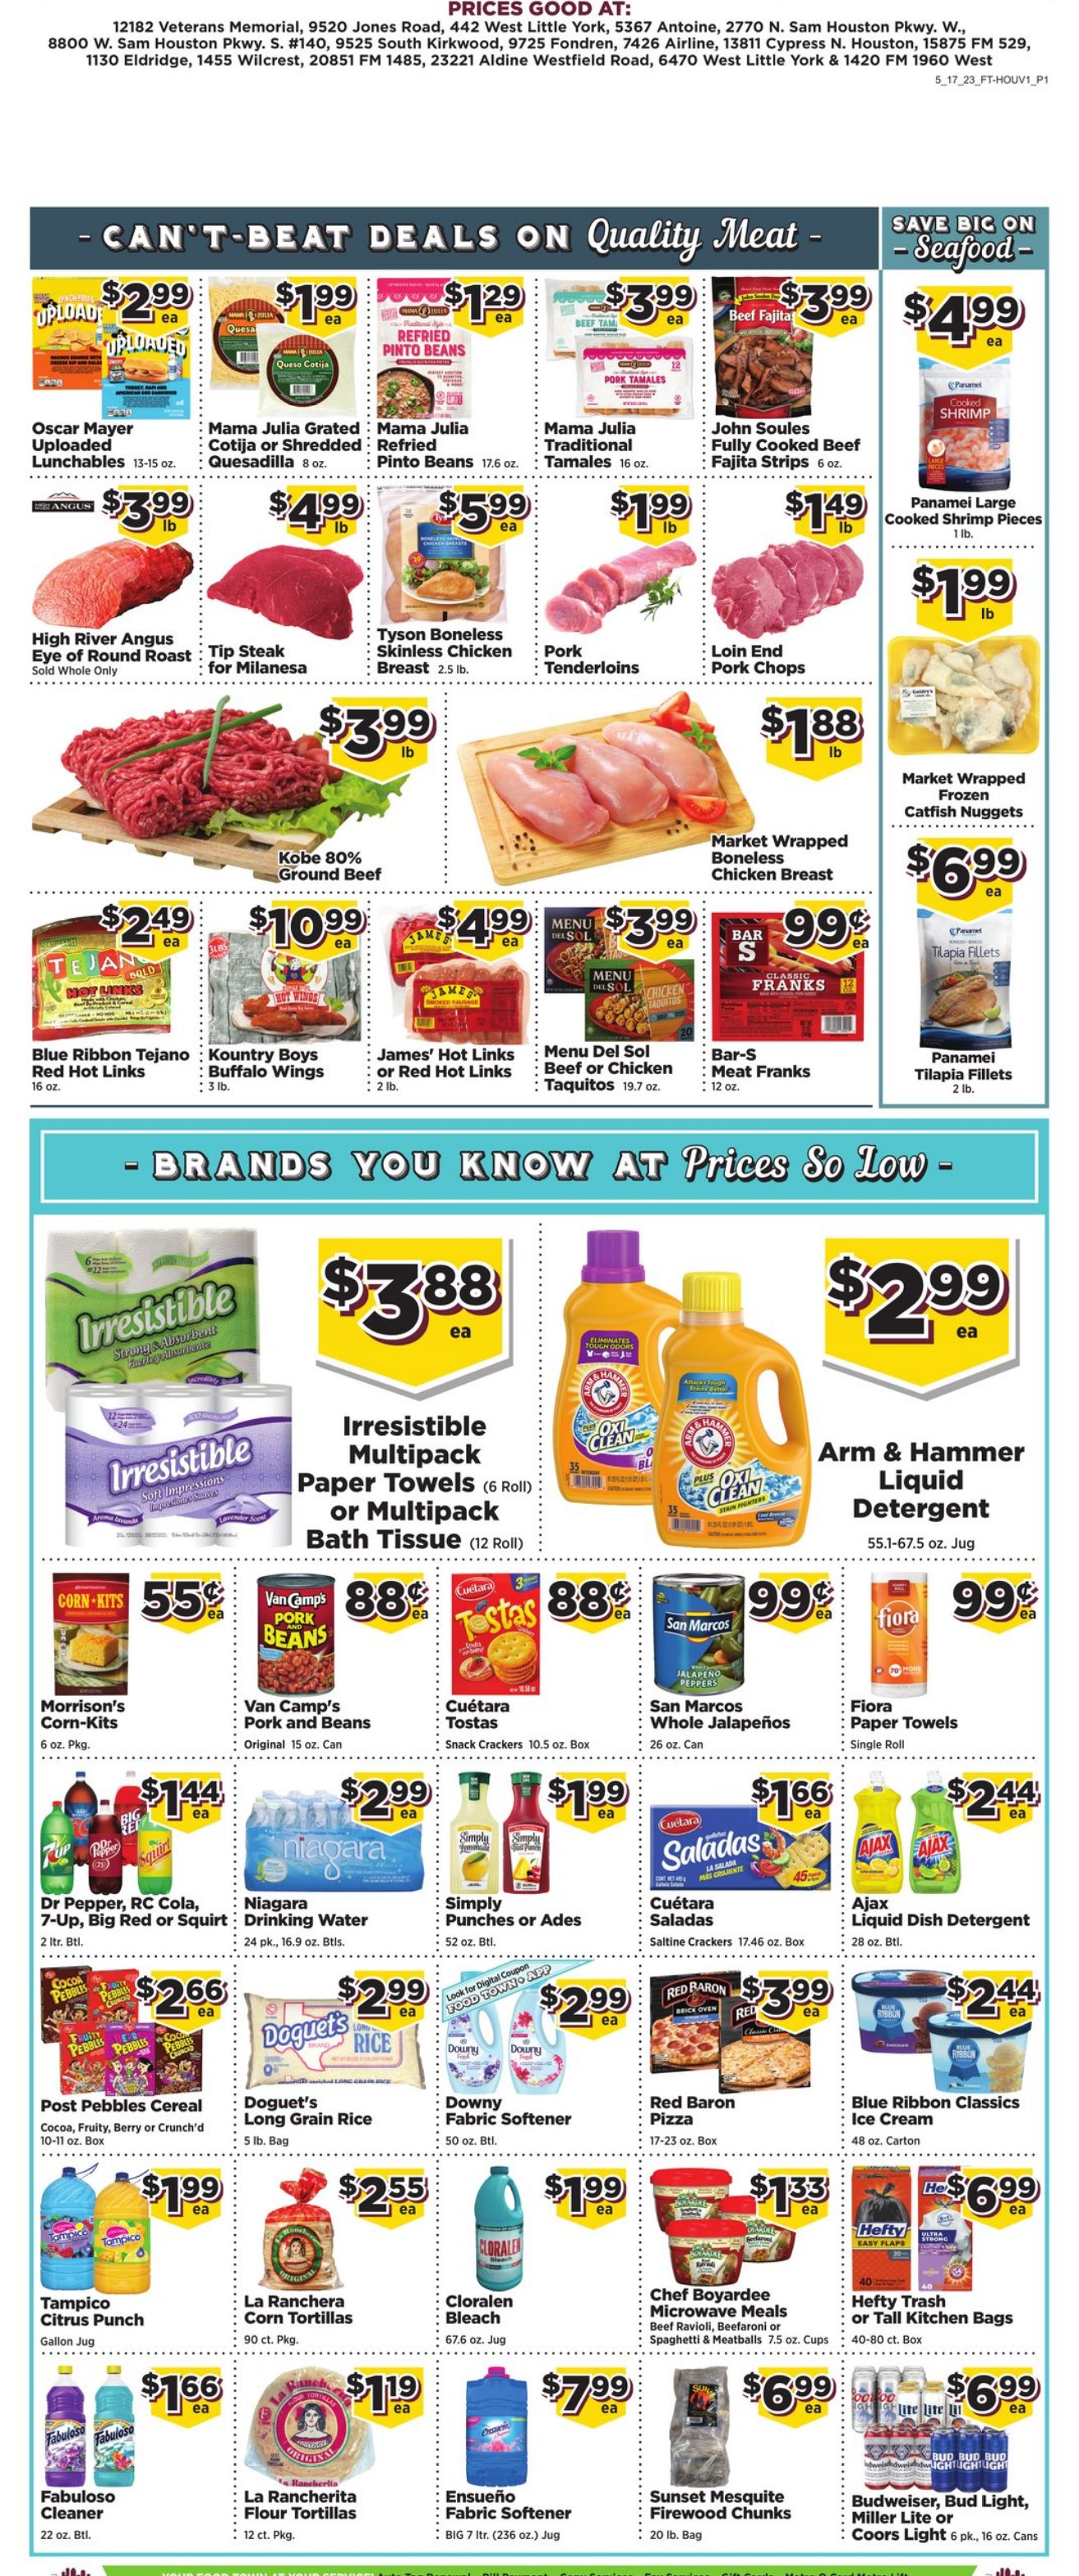 Weekly ad Your Food Town 05/17/2023 - 05/24/2023